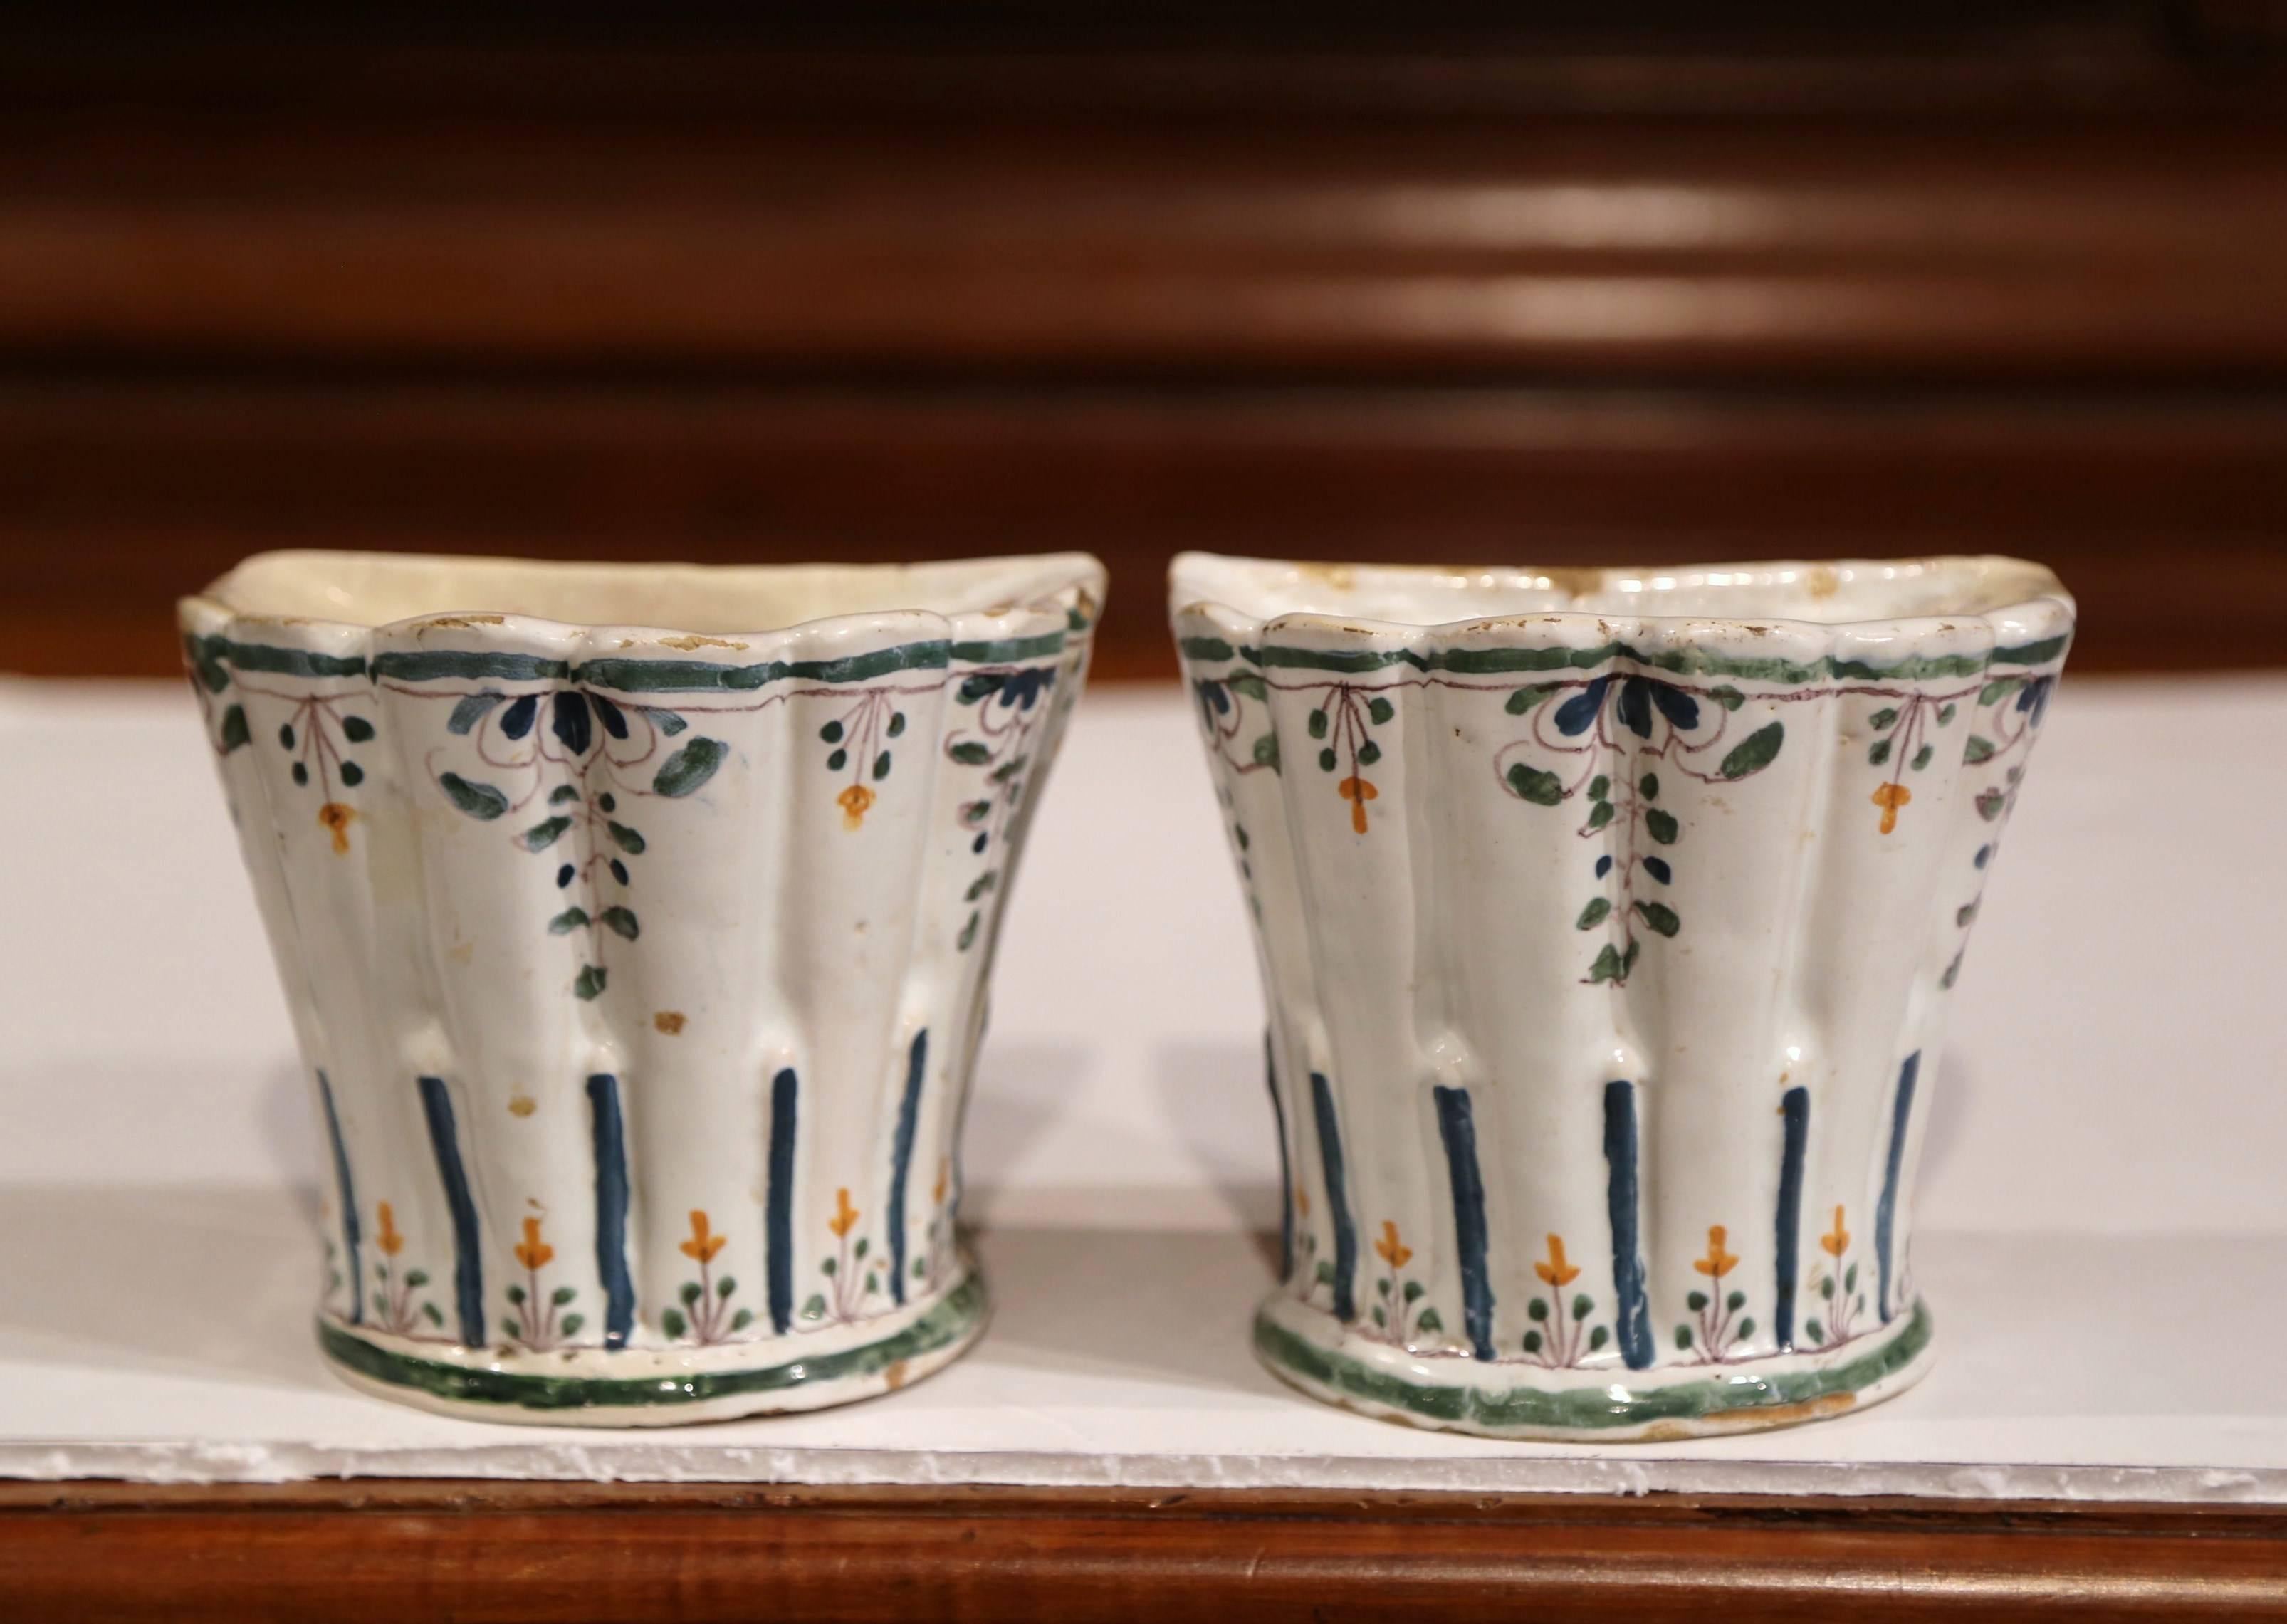 This elegant pair of antique faience bouquetieres (or pique-fleurs) were sculpted in France, circa 1850. These hand-painted vases feature colorful floral motifs in the blue, green and white palette colors. The flower holders have small holes on the